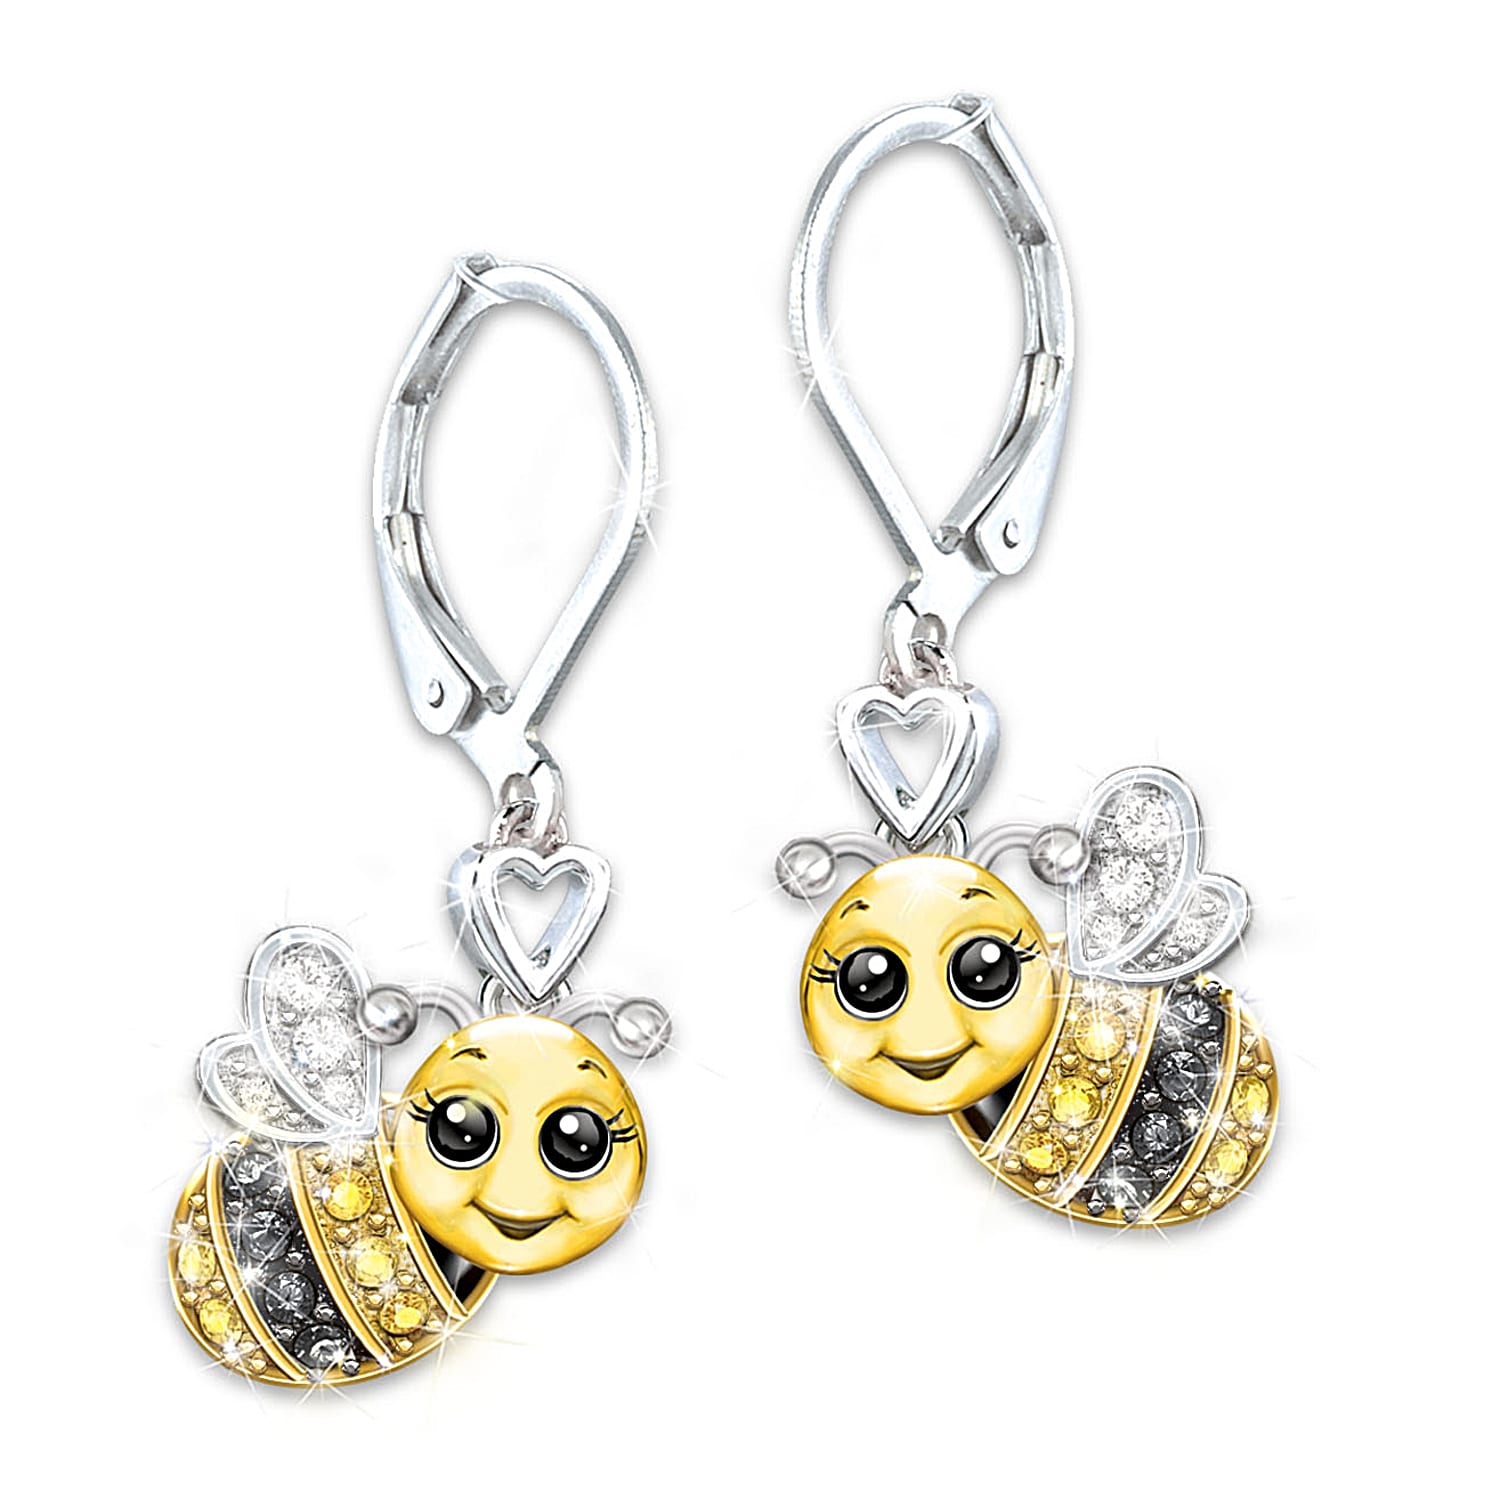 Bumble Bee Stud Earrings For Women And Girls, Bee Jewelry - Honey Bee Gifts  For Girls And Tweens